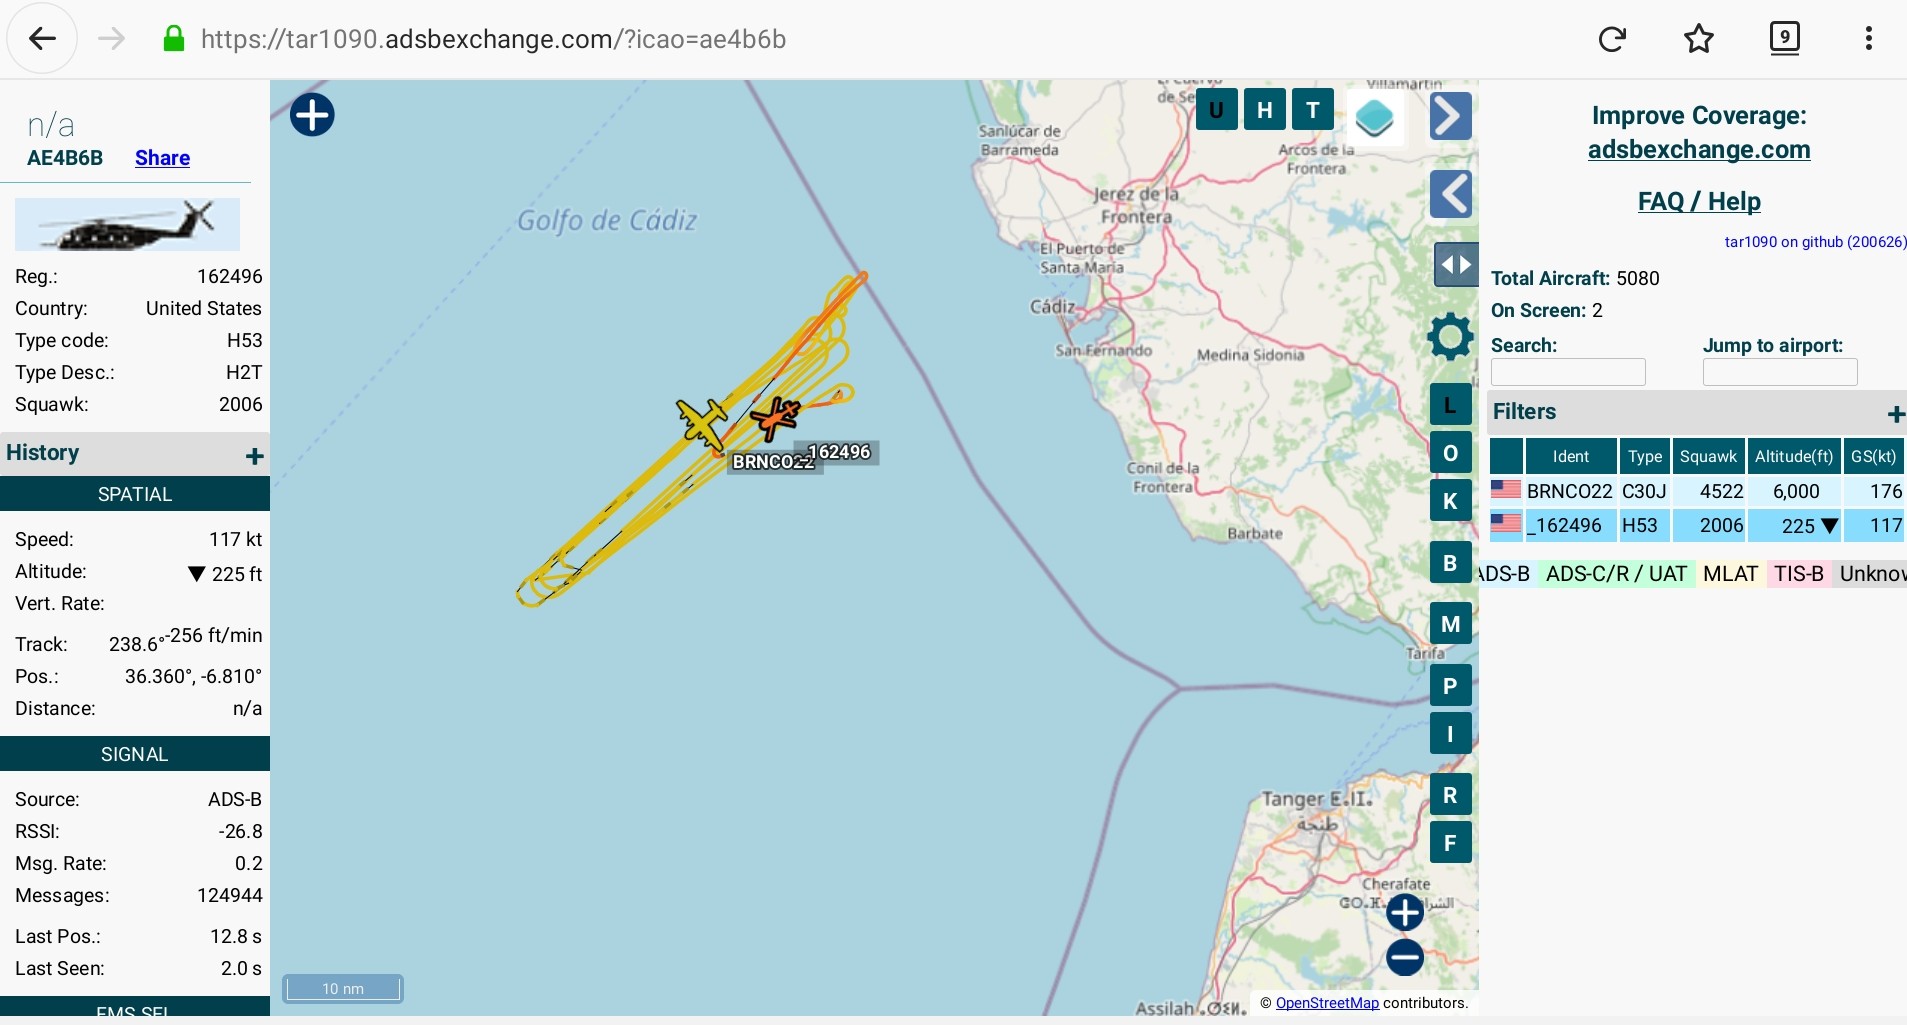 Cool things seen on FlightRadar - Page 171 - Boats, Planes & Trains - PistonHeads